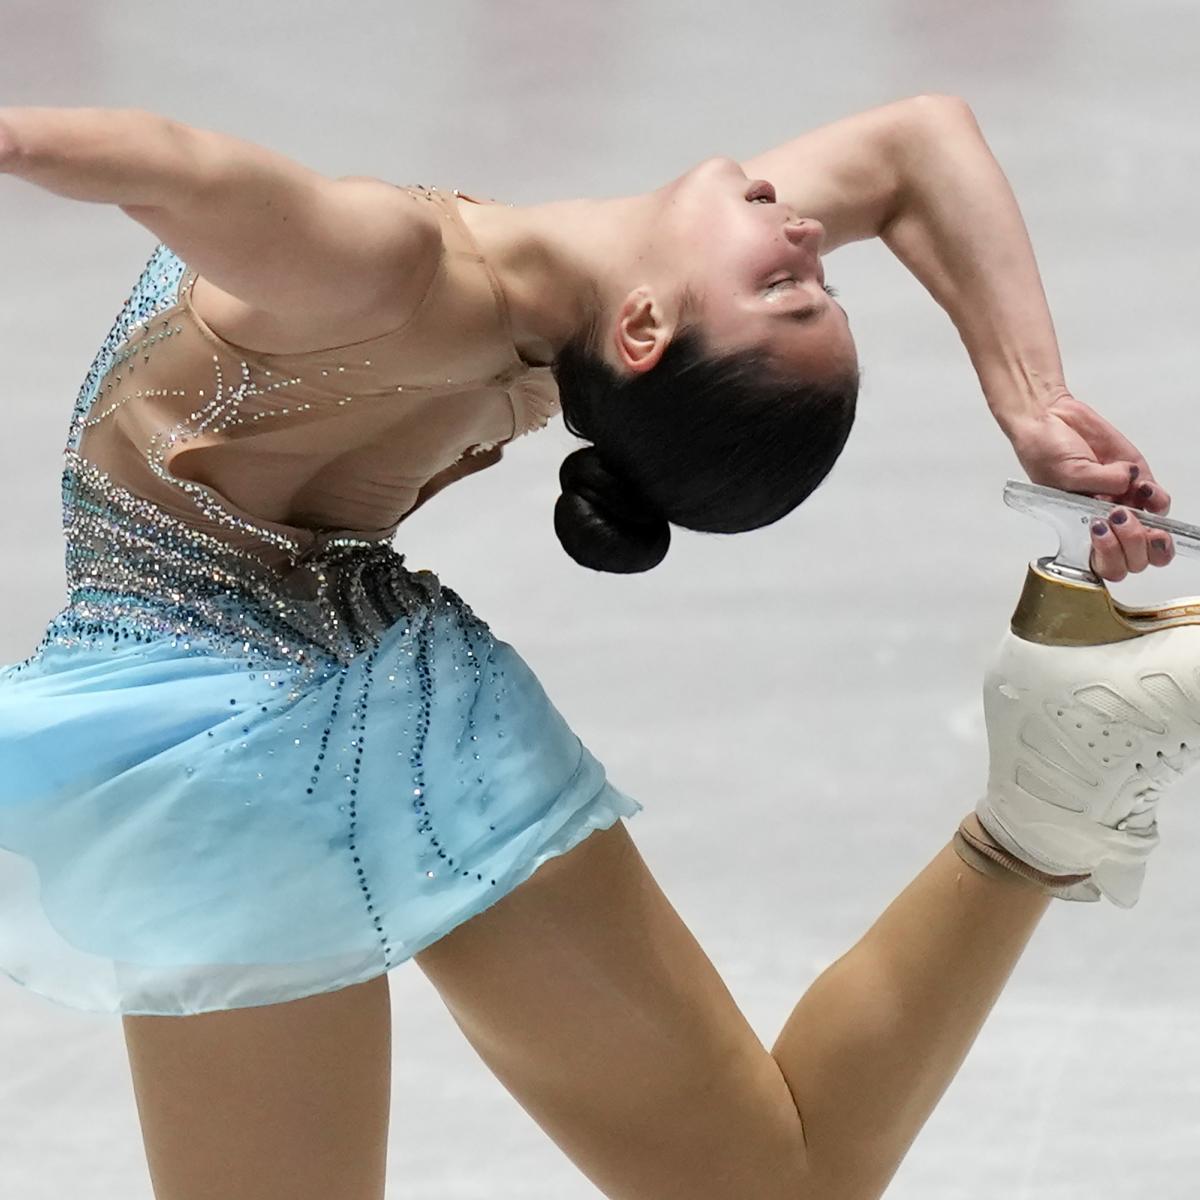 US Figure Skating Championships TV Schedule 2022 Thursday Preview